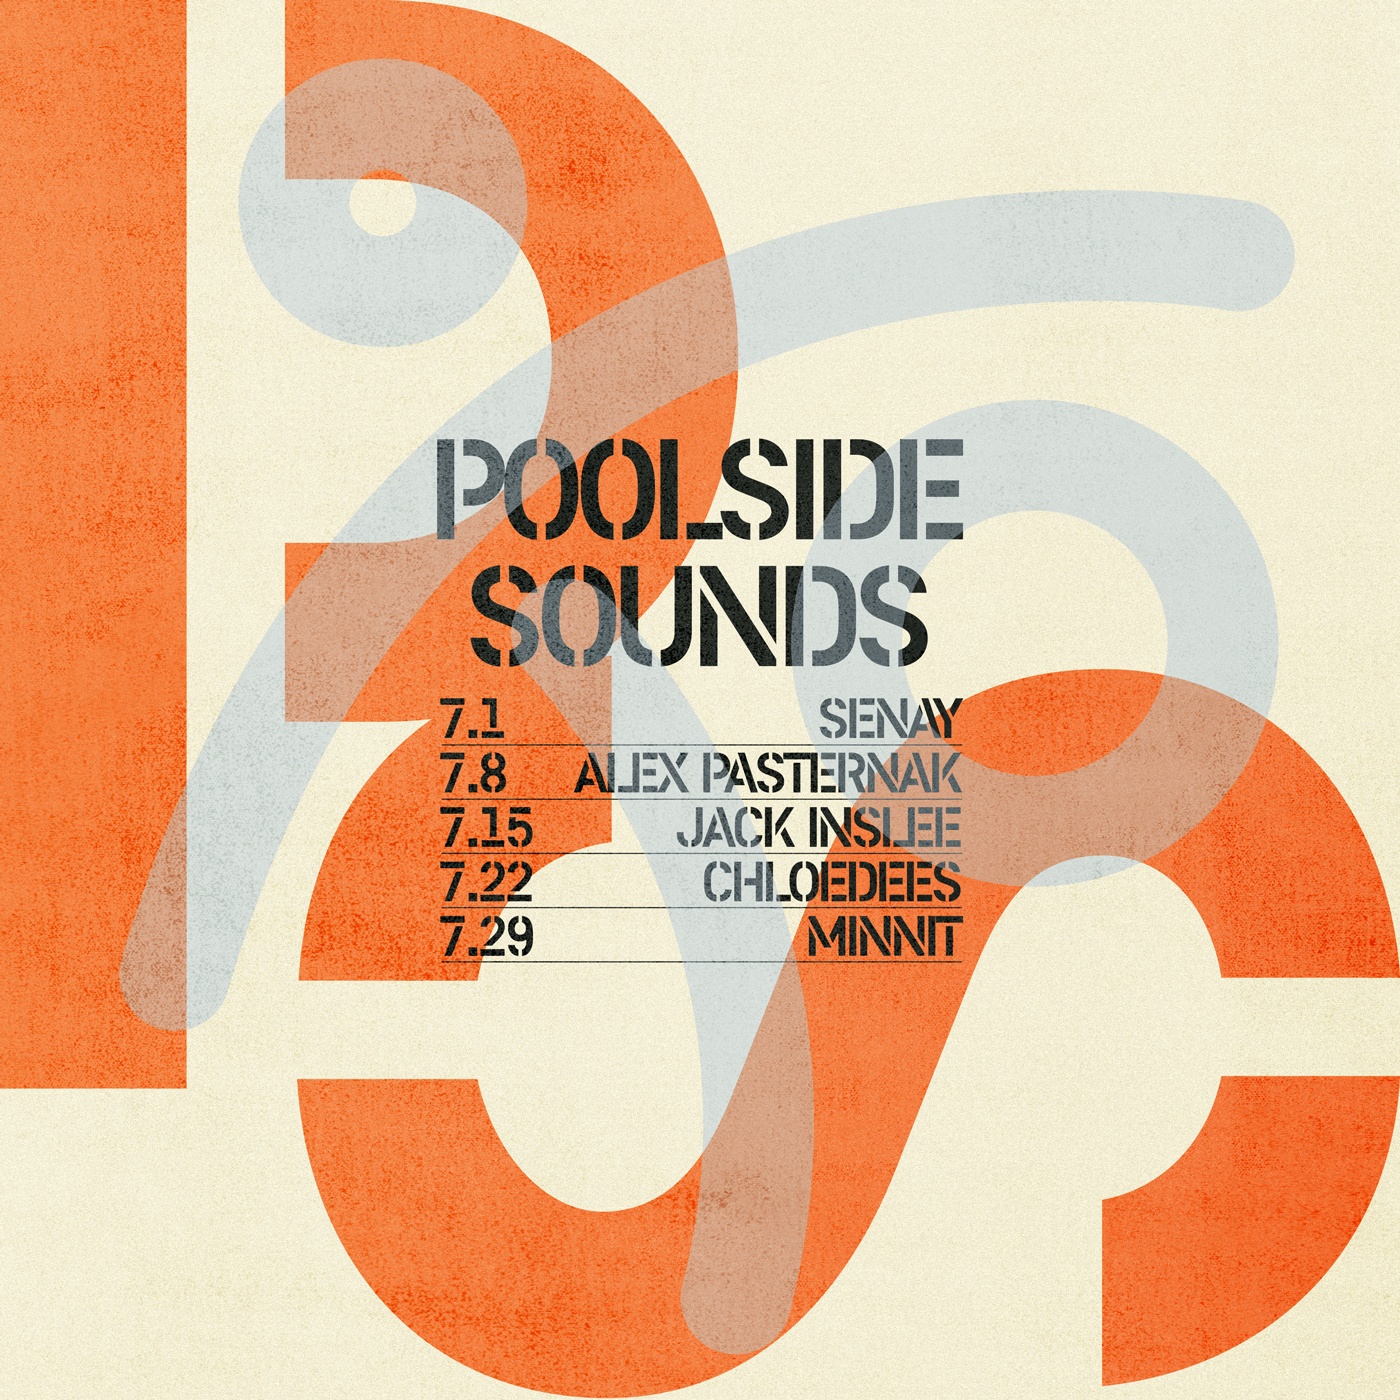 A flyer for July pool parties called Poolside Sounds